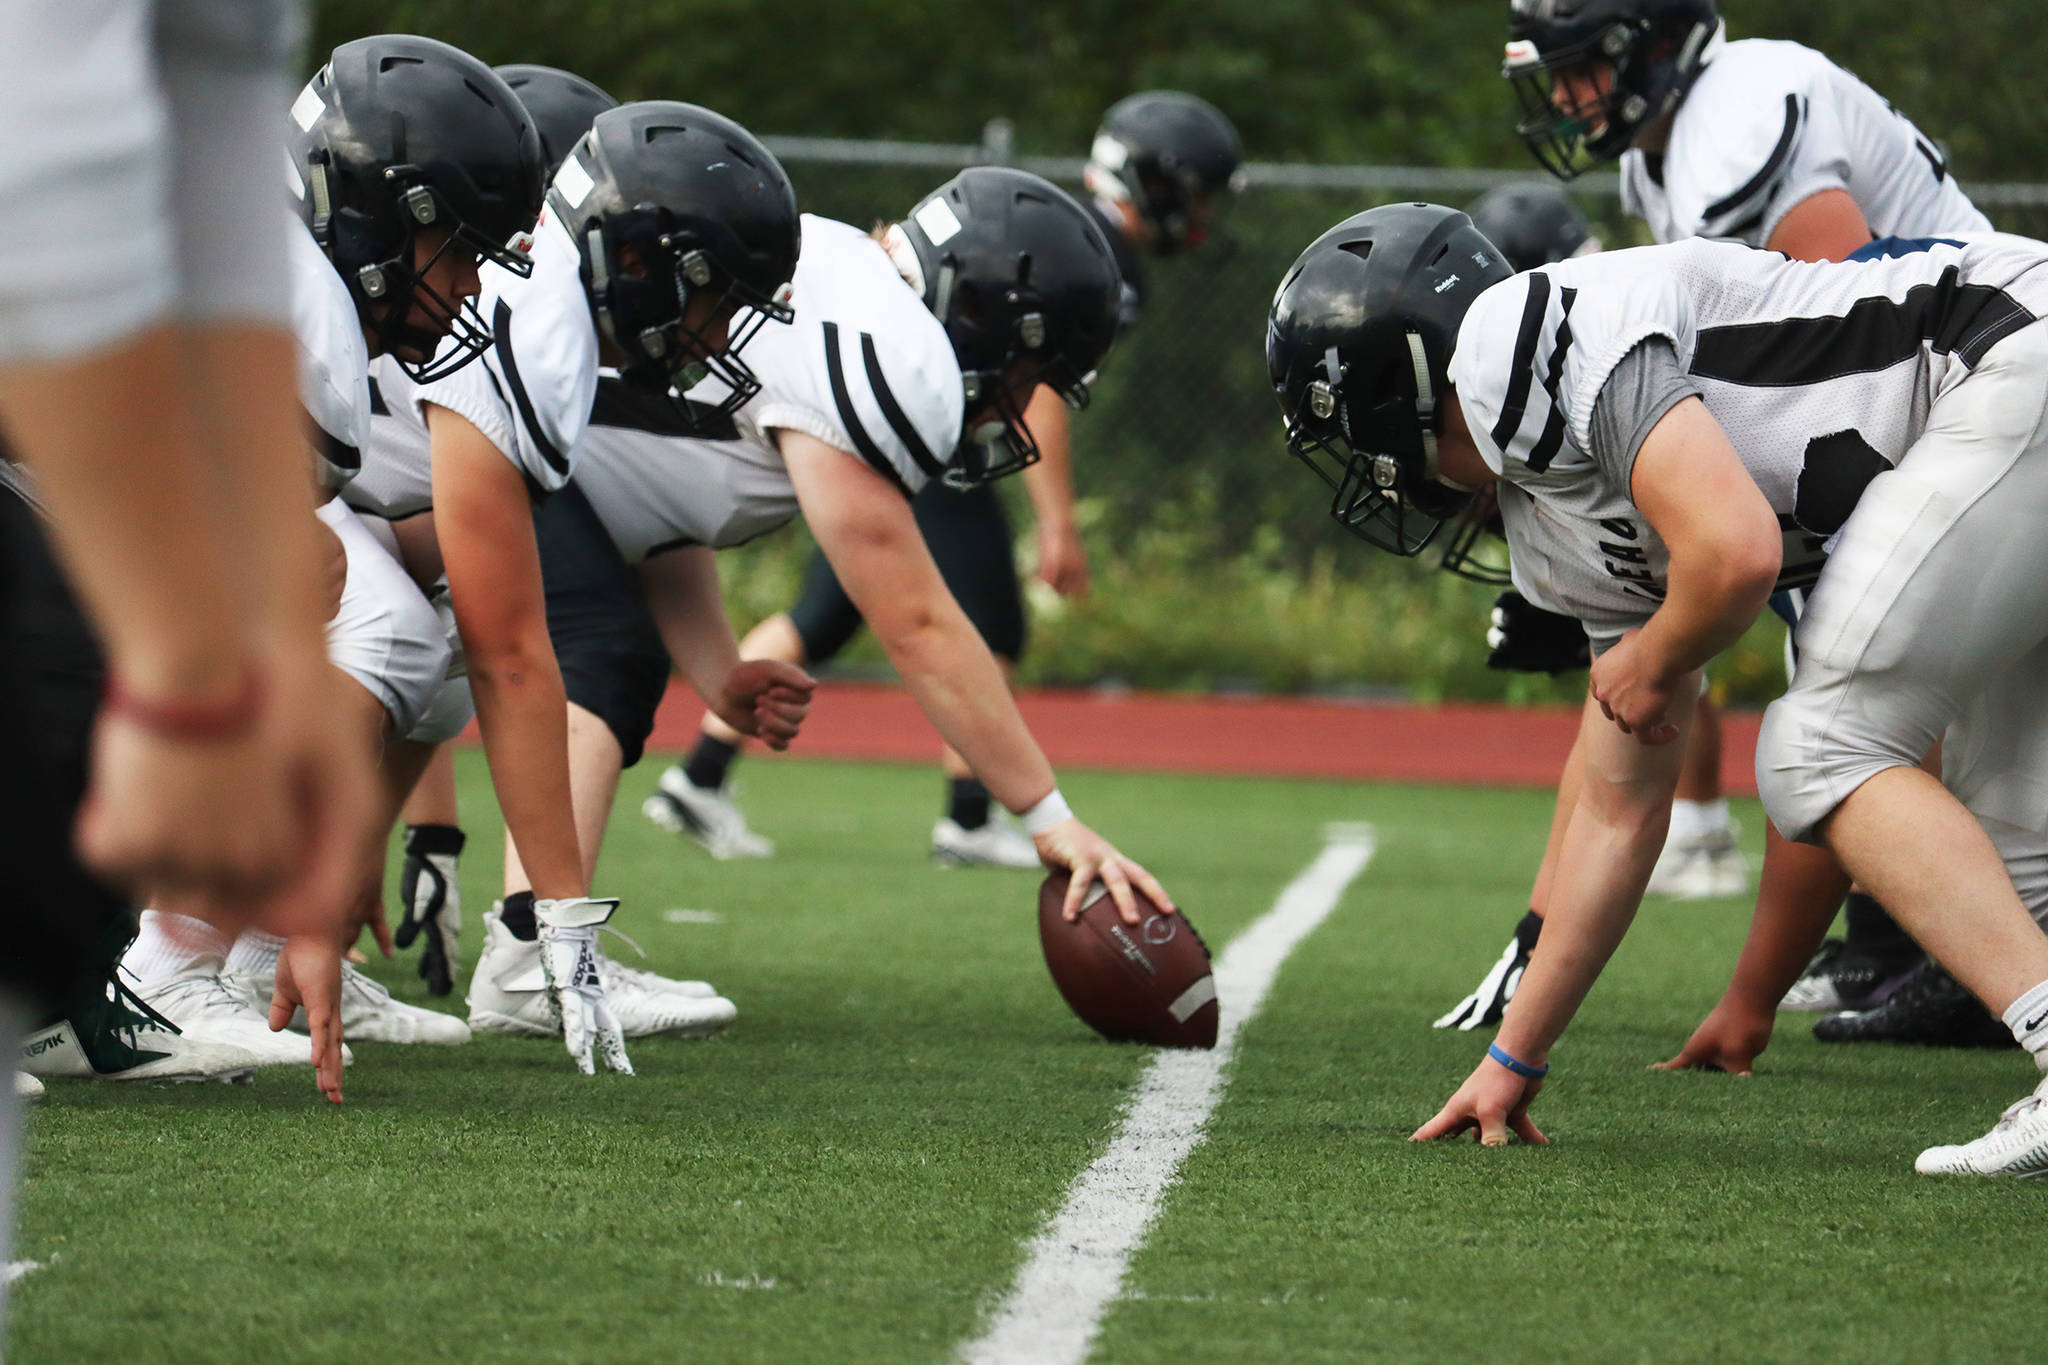 The Juneau Huskies practice on Aug. 10. The high school football team's record stands at 2-1 following a loss to West Anchorage over the weekend. On Saturday, Juneau will host East Anchorage. (Ben Hohenstatt / Juneau Empire File)